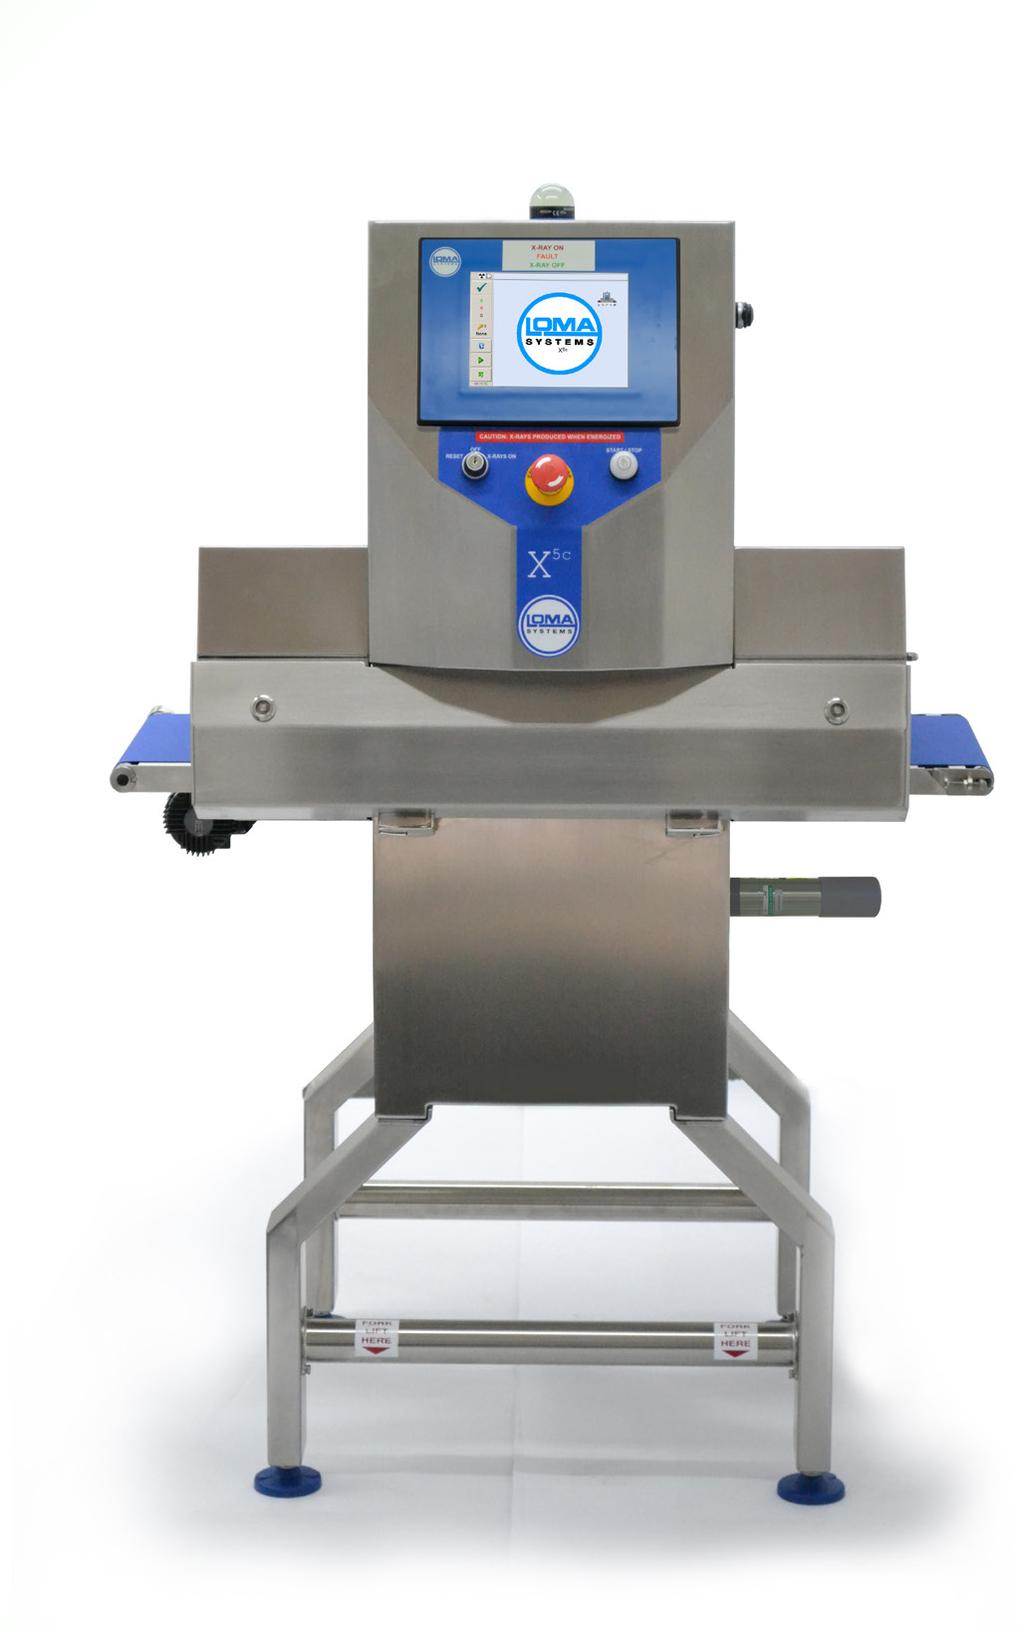 designed to be used with packaged product up to 25kg in weight X5 XL X-ray